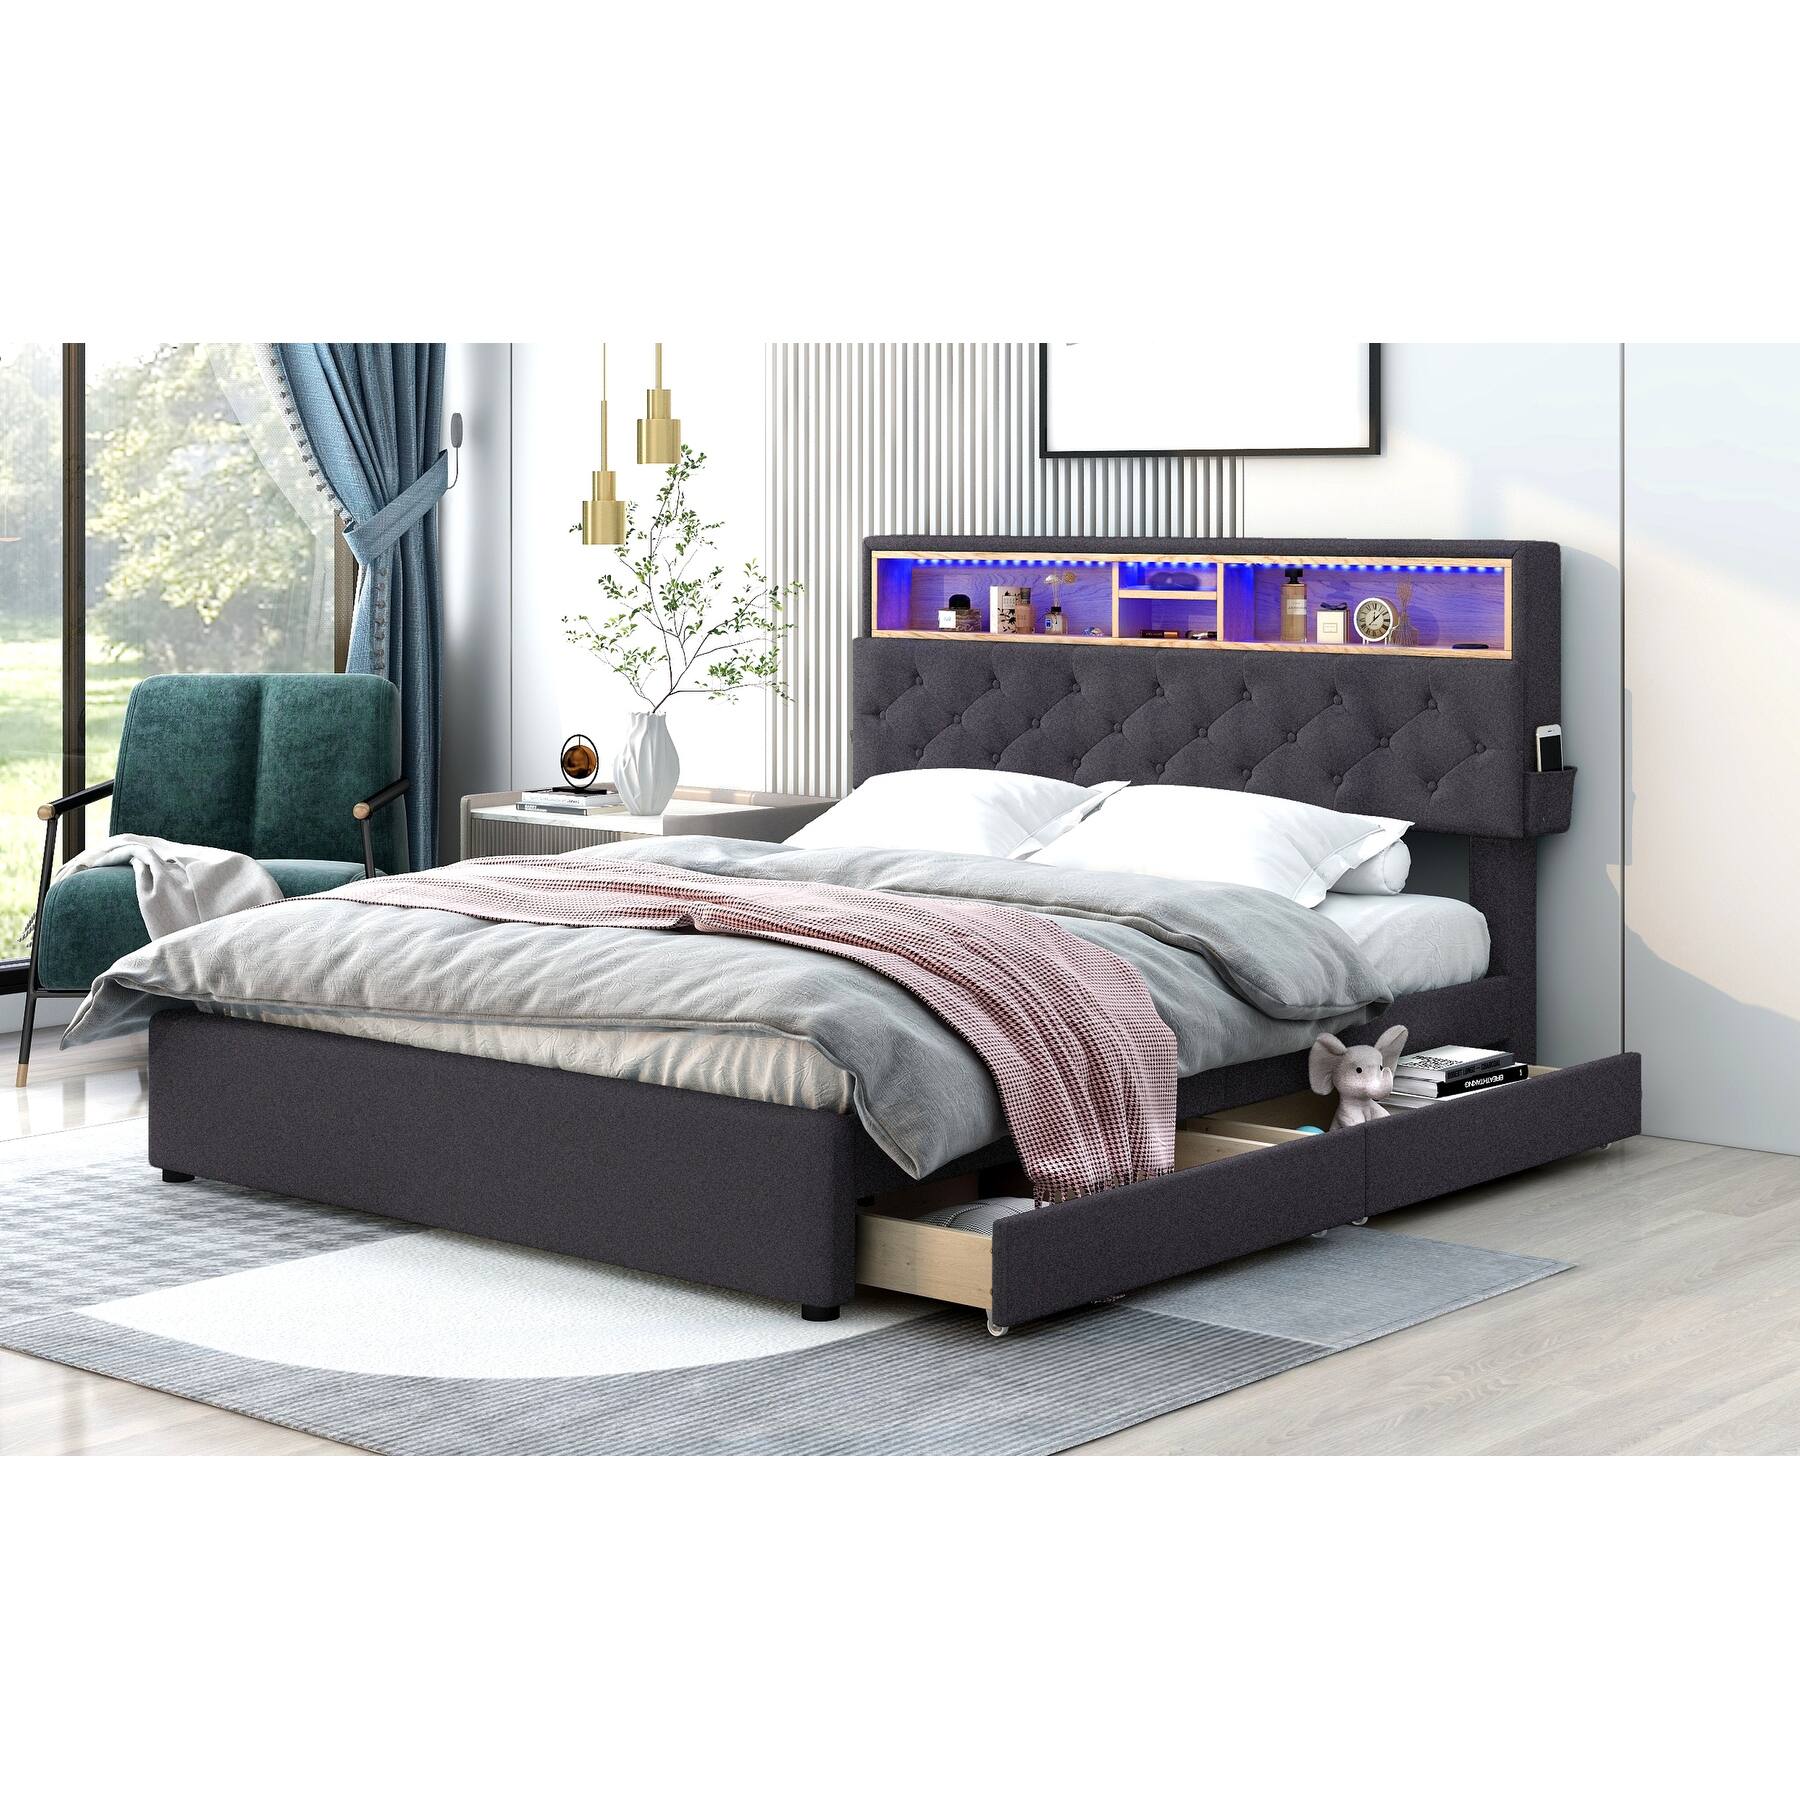 Queen Size Platform Bed, Upholstered Bed Frame with Storage Headboard ...